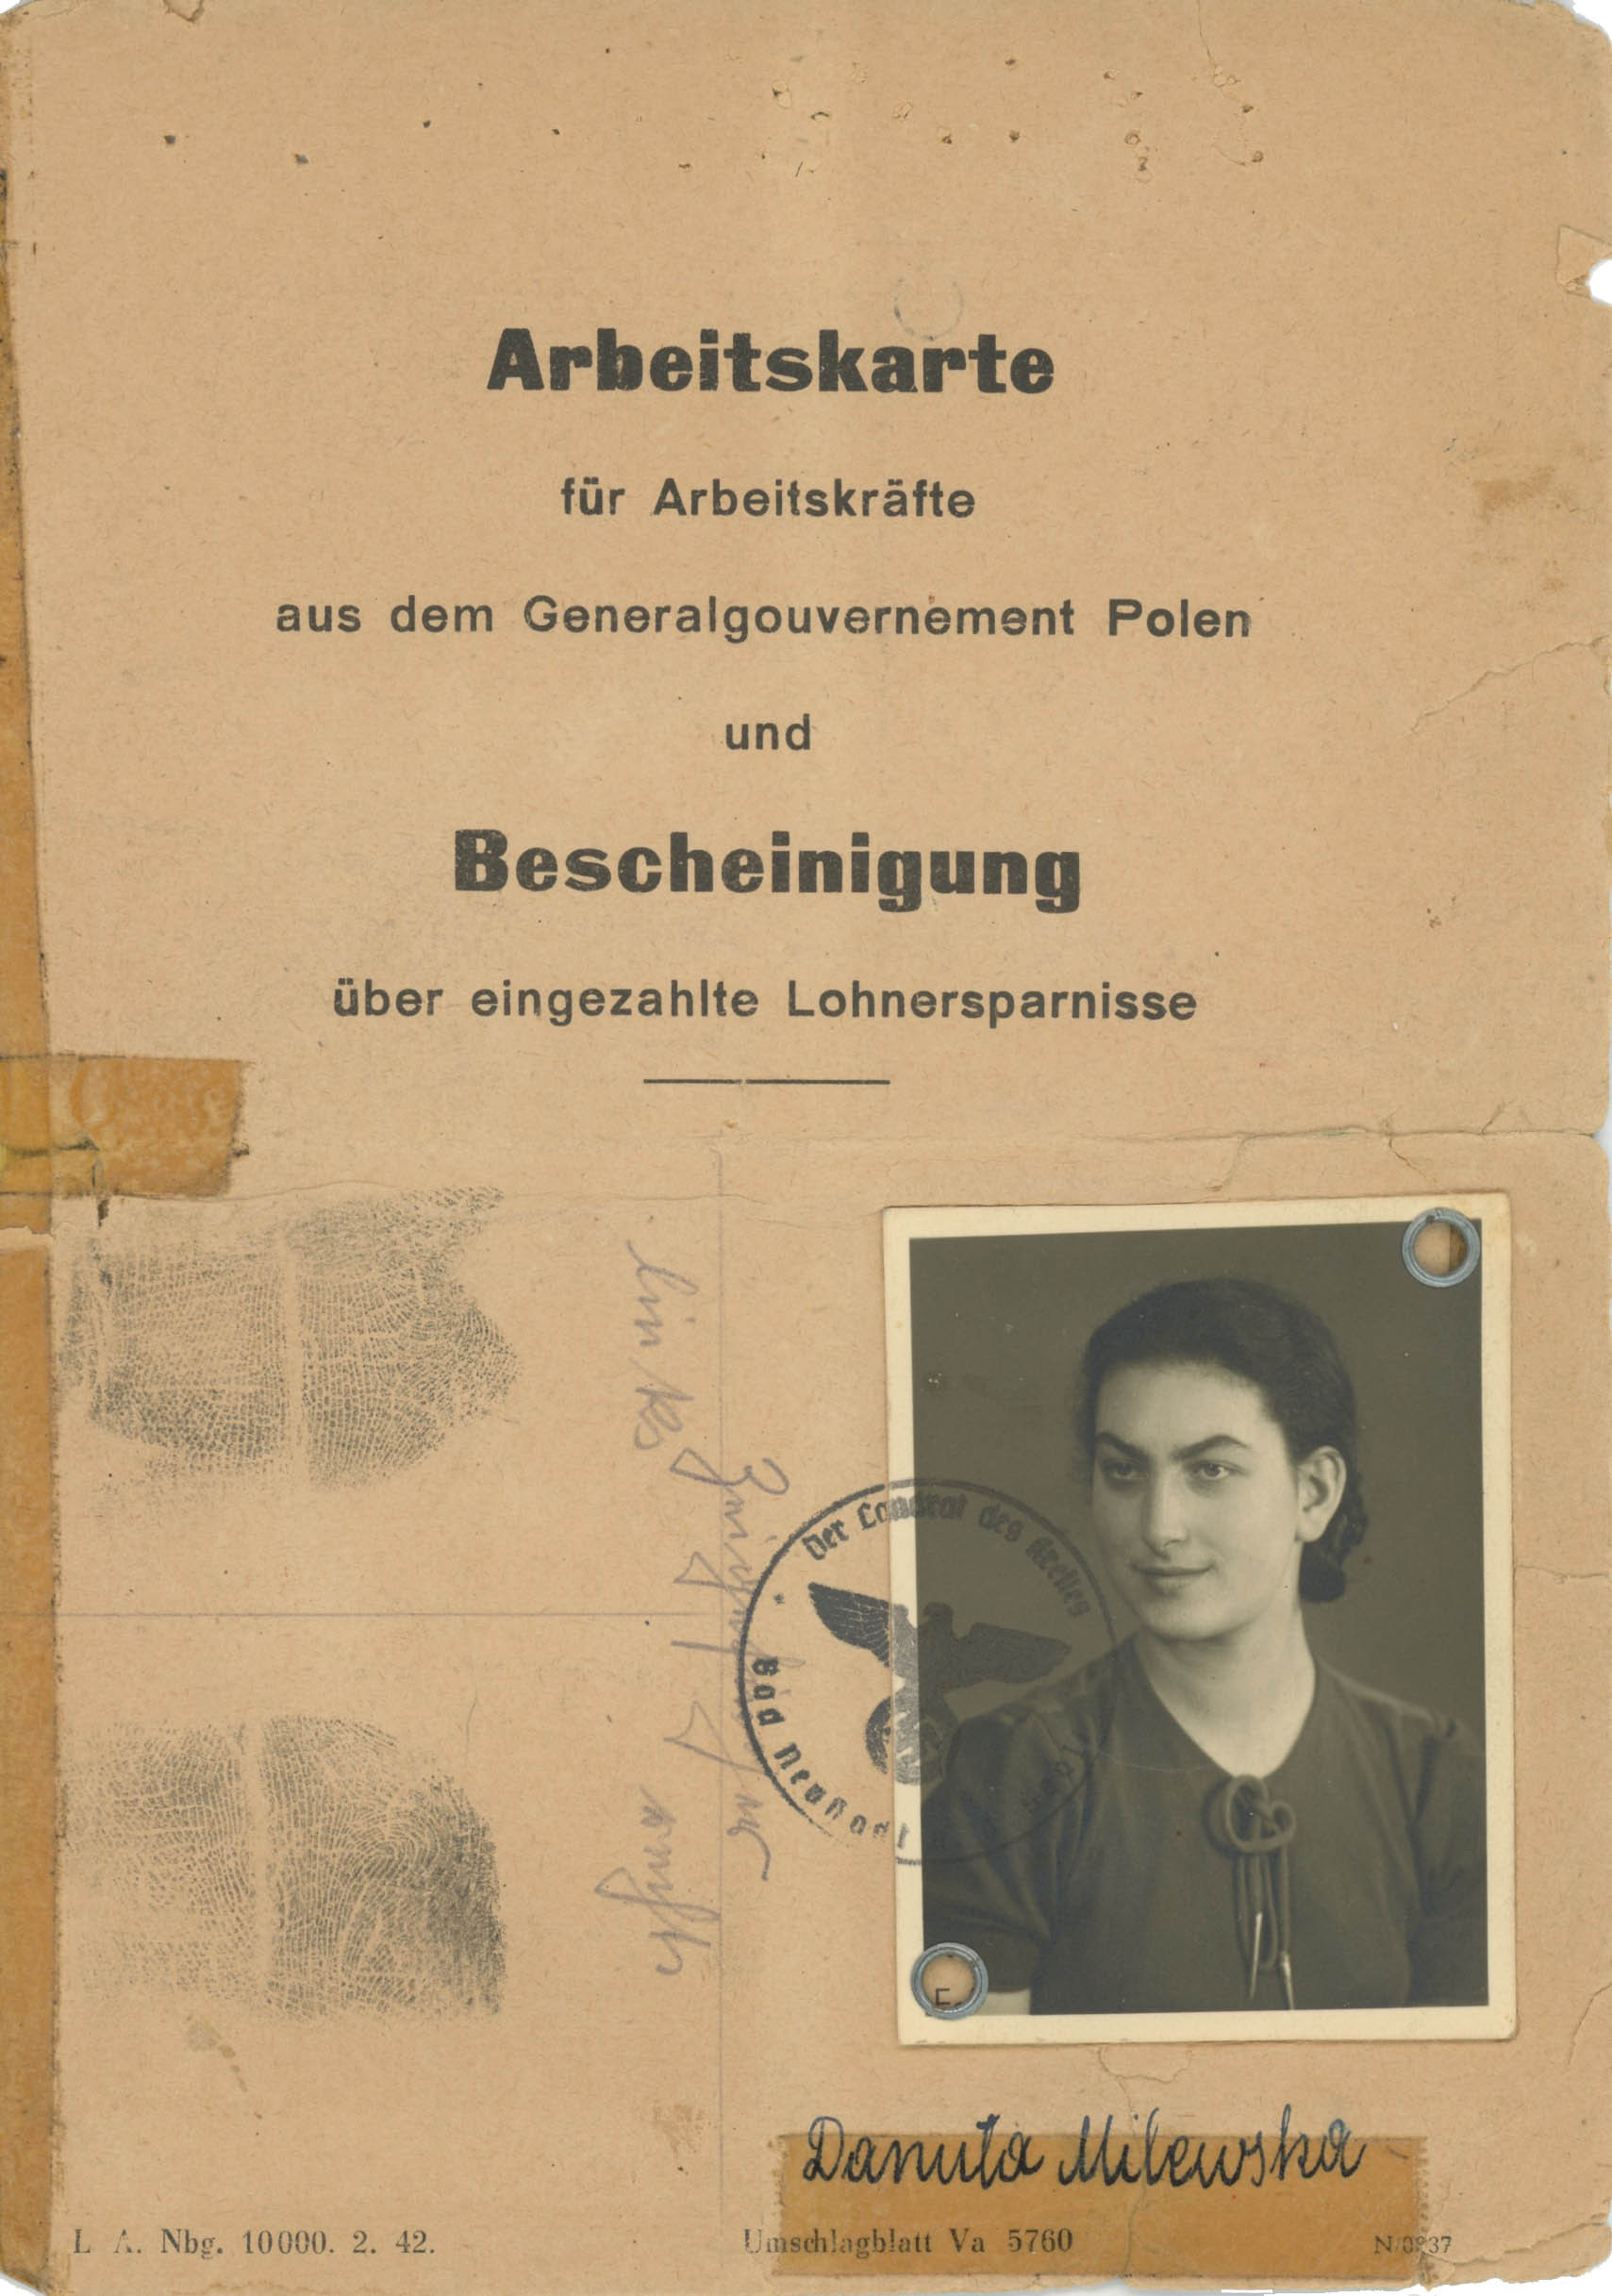 My mother's work card as a slave laborer in Germany. Note her alias below the photo.